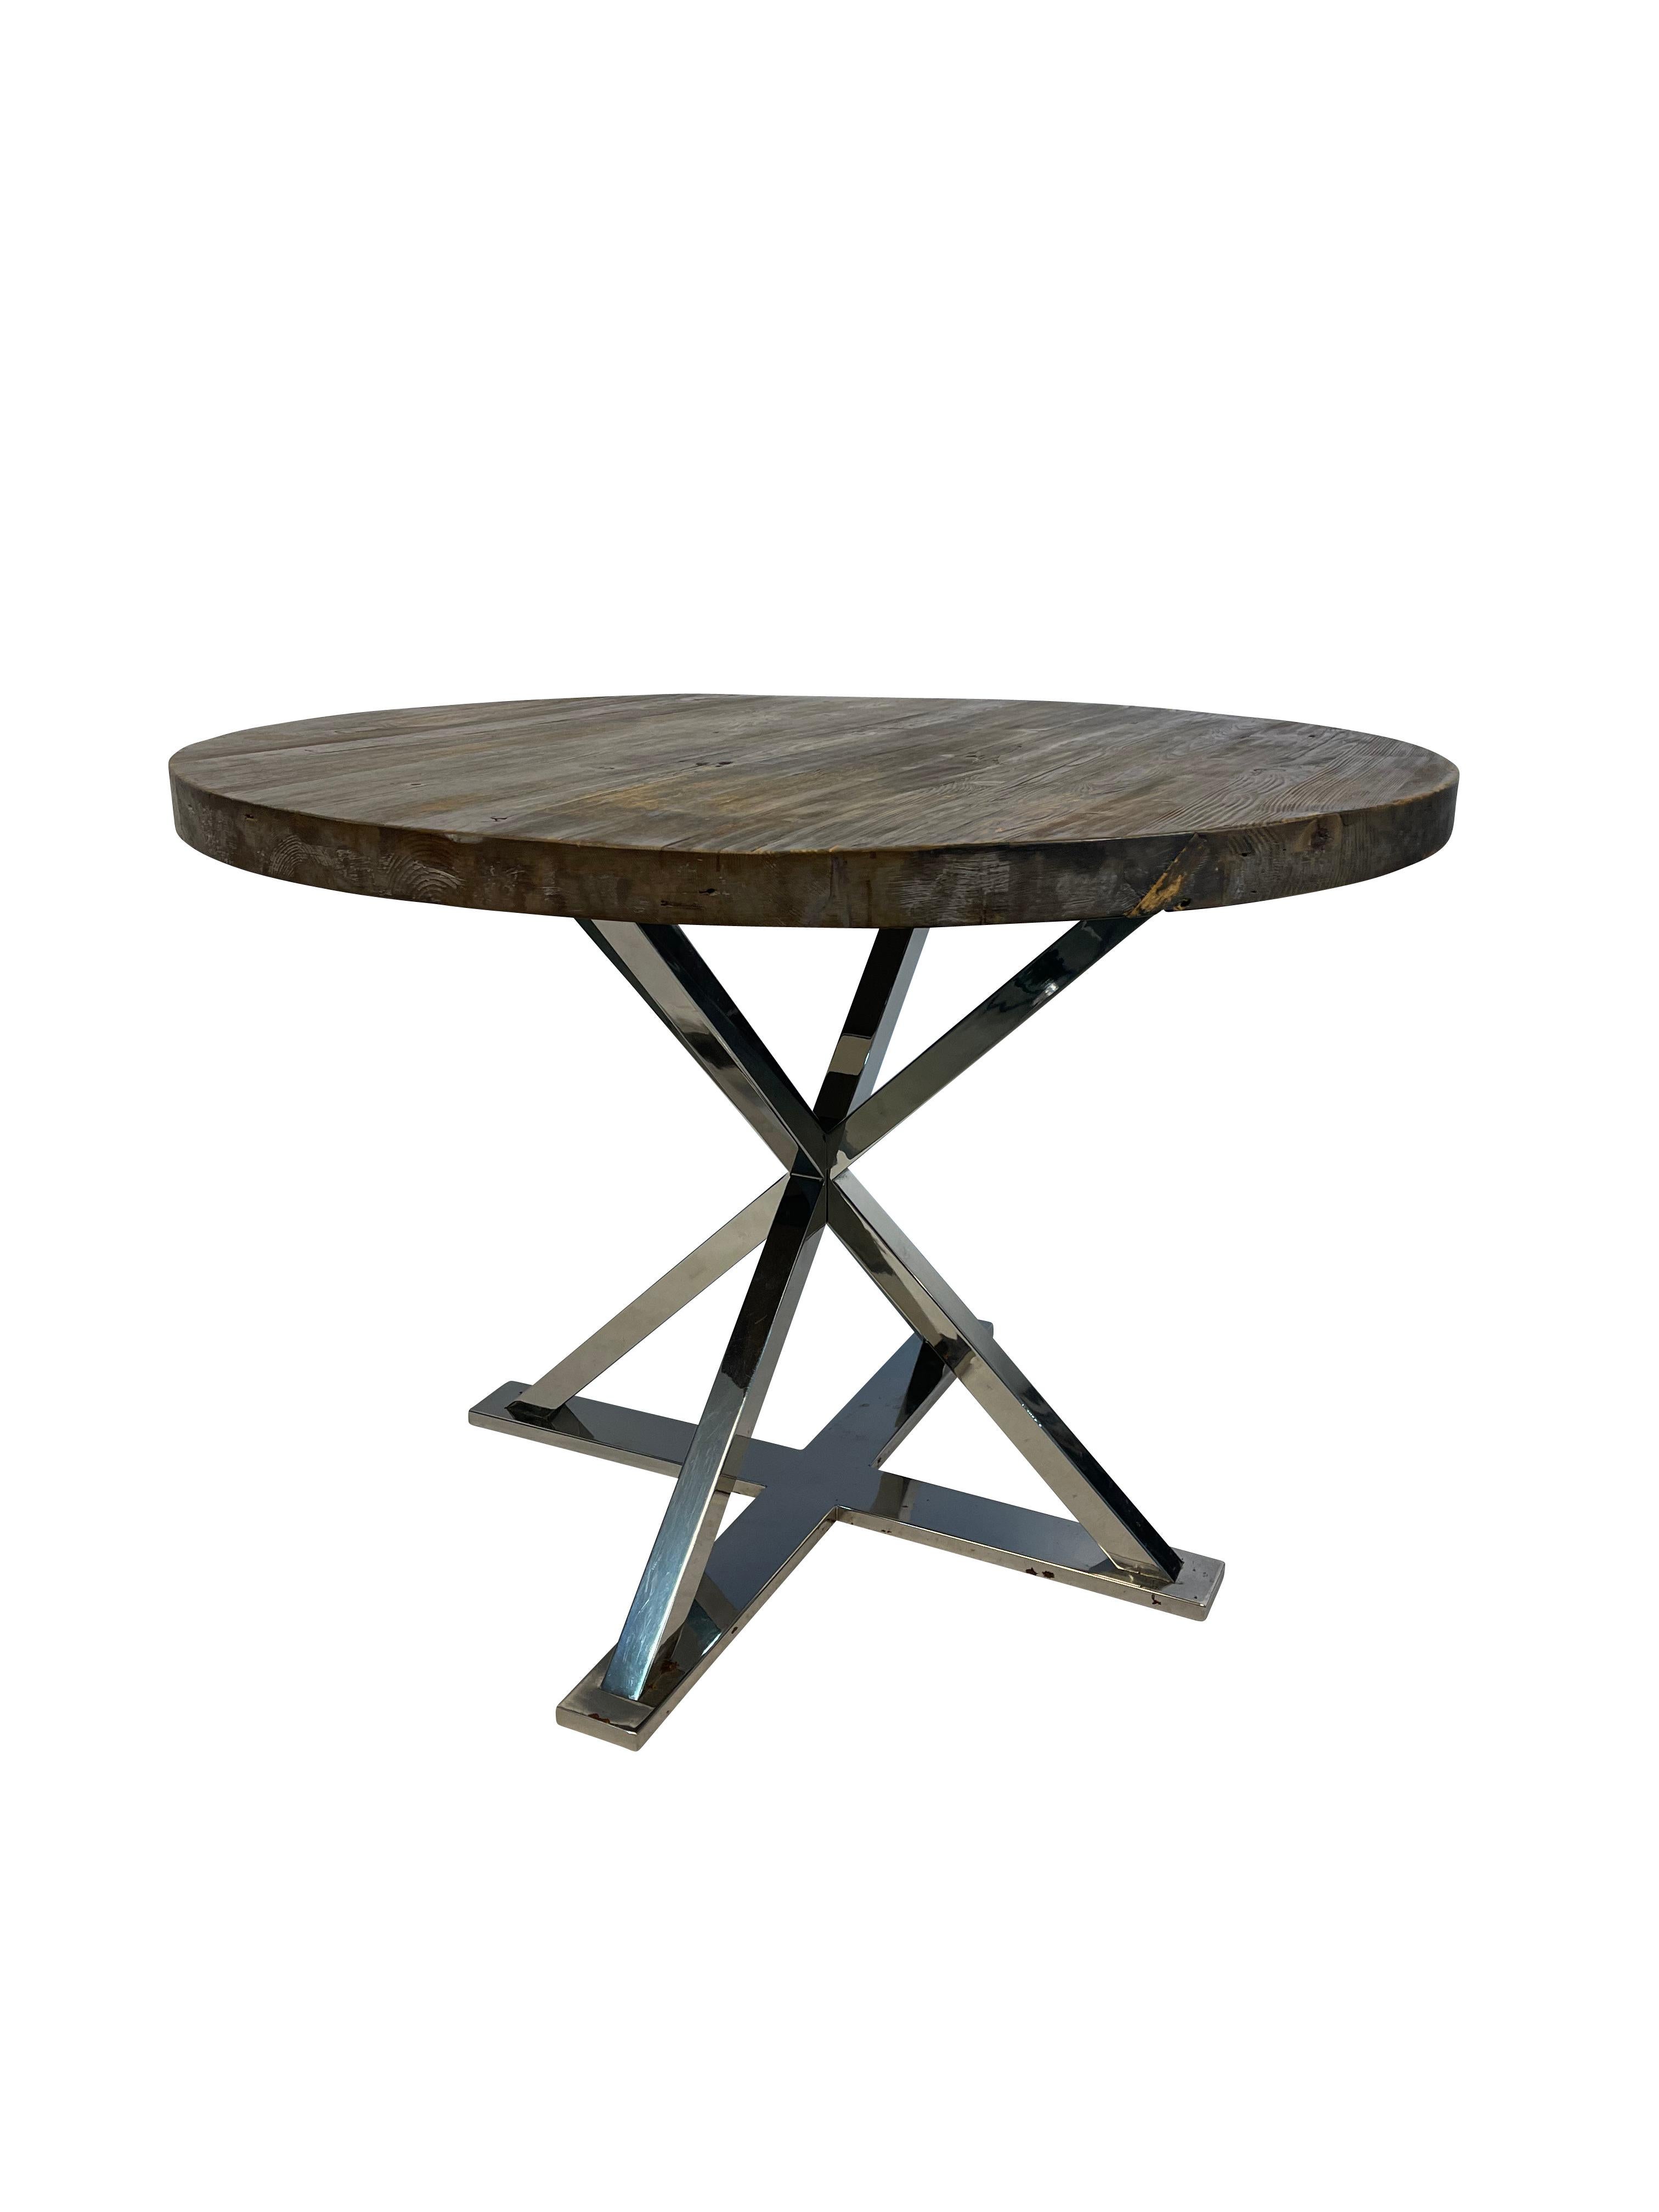  Rustic Wood Top   Round Dining Table with Modern Chrome Base  In Good Condition For Sale In Essex, MA